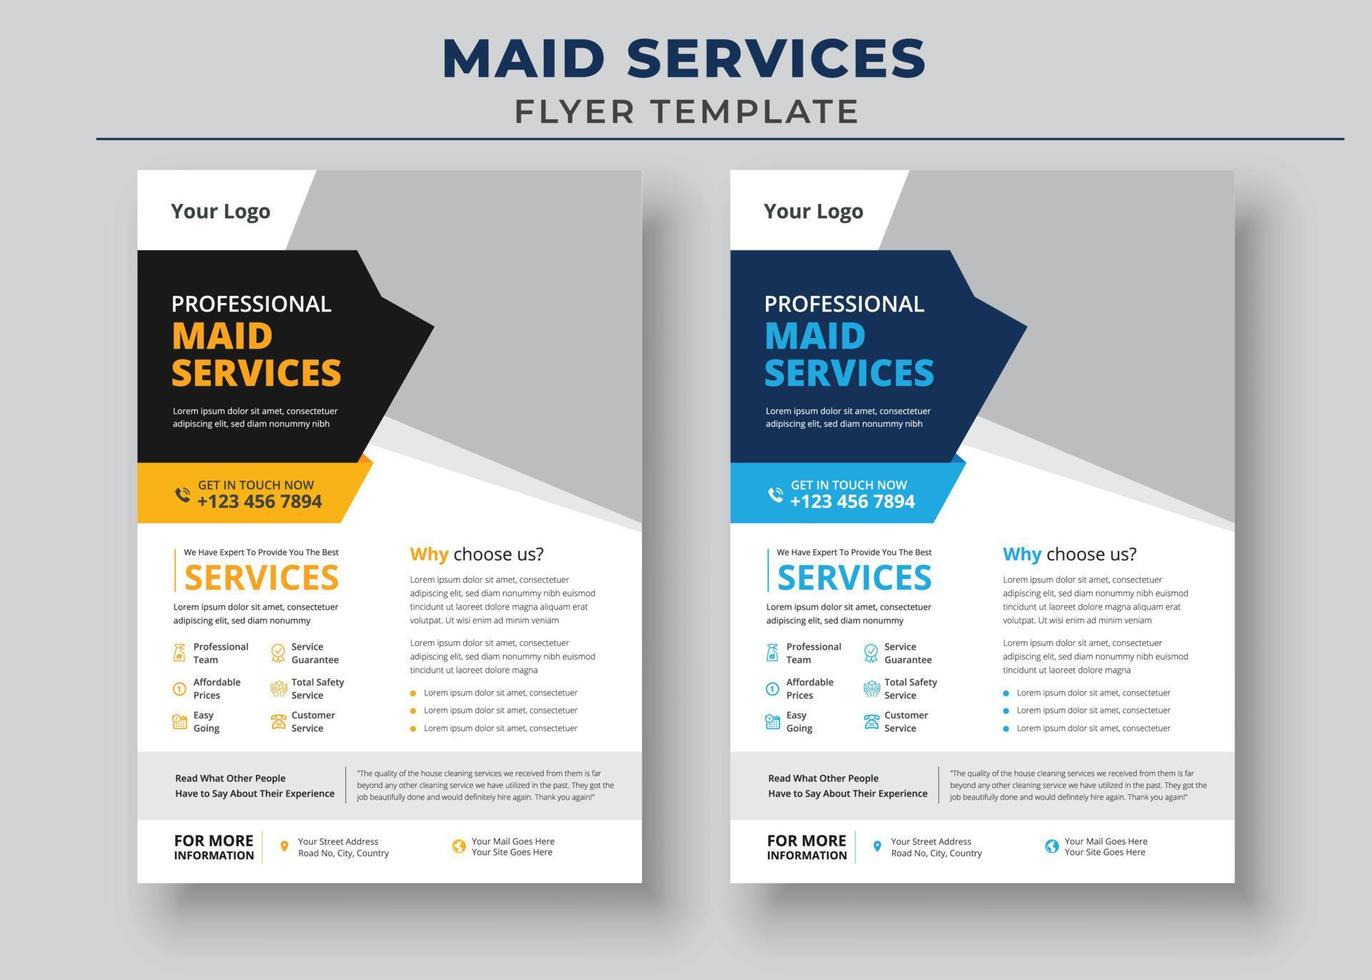 Professional Maid Service, Maid Service Flyer Template, Housekeeping Services Flyer vector